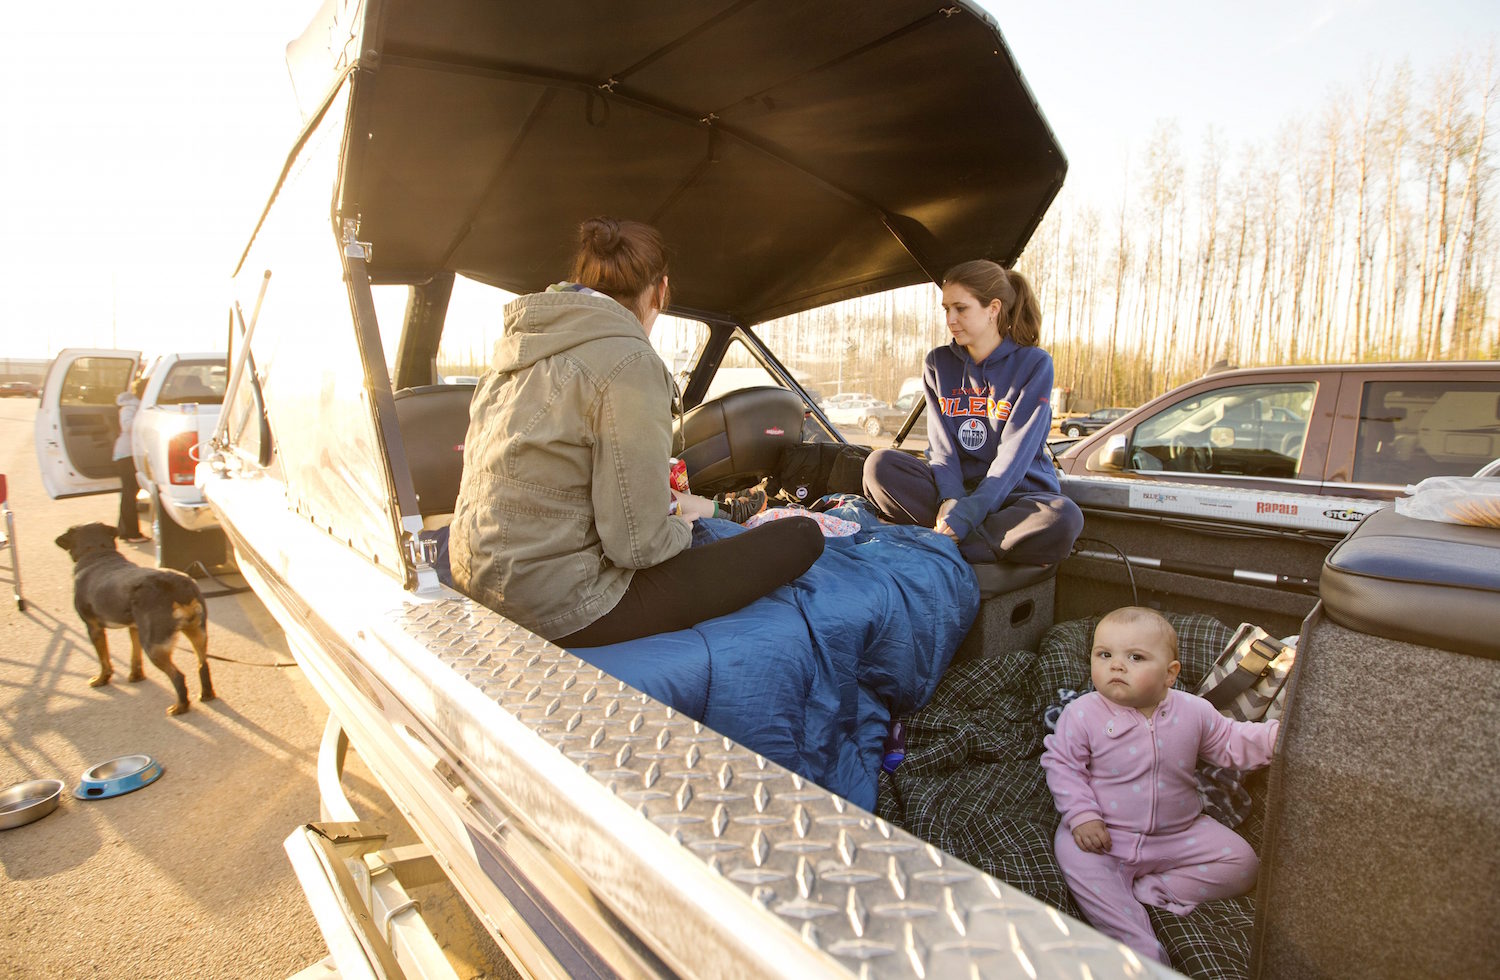 A family takes refuge in the back of their boat after evacuation at a rest stop near Fort McMurray, Alberta, Canada, on Wednesday, May 4, 2016. Thousands of residents were ordered to flee as flames moved into the Canadian oil sands city, destroying whole neighborhoods. (Jason Franson/The Canadian Press via AP) MANDATORY CREDIT